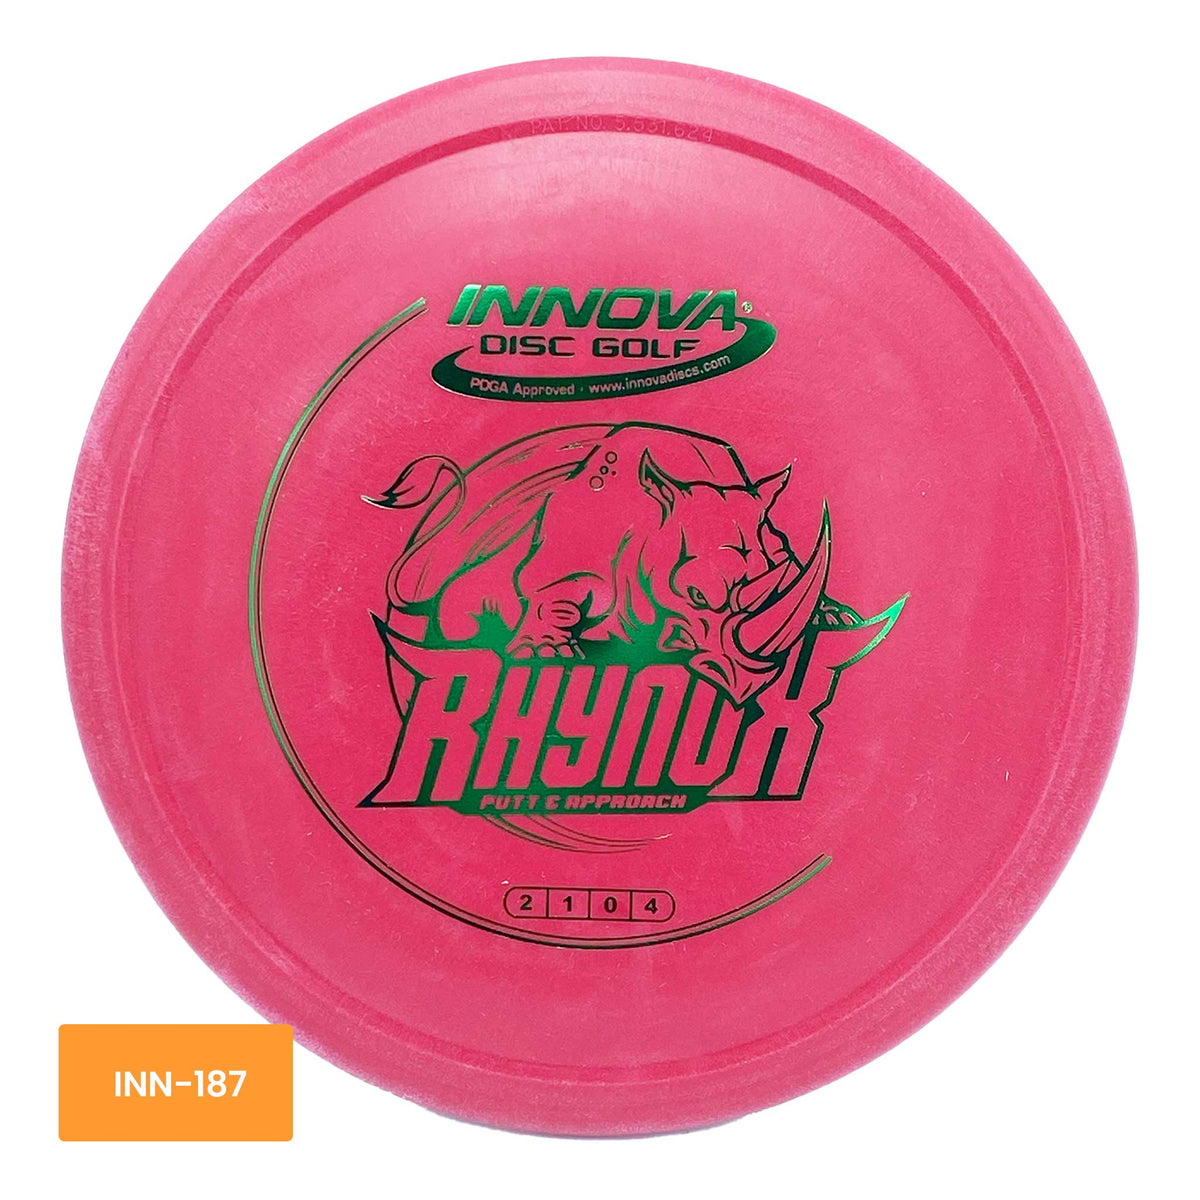 Innova Disc Golf DX RhynoX putter and approach - Red / Green